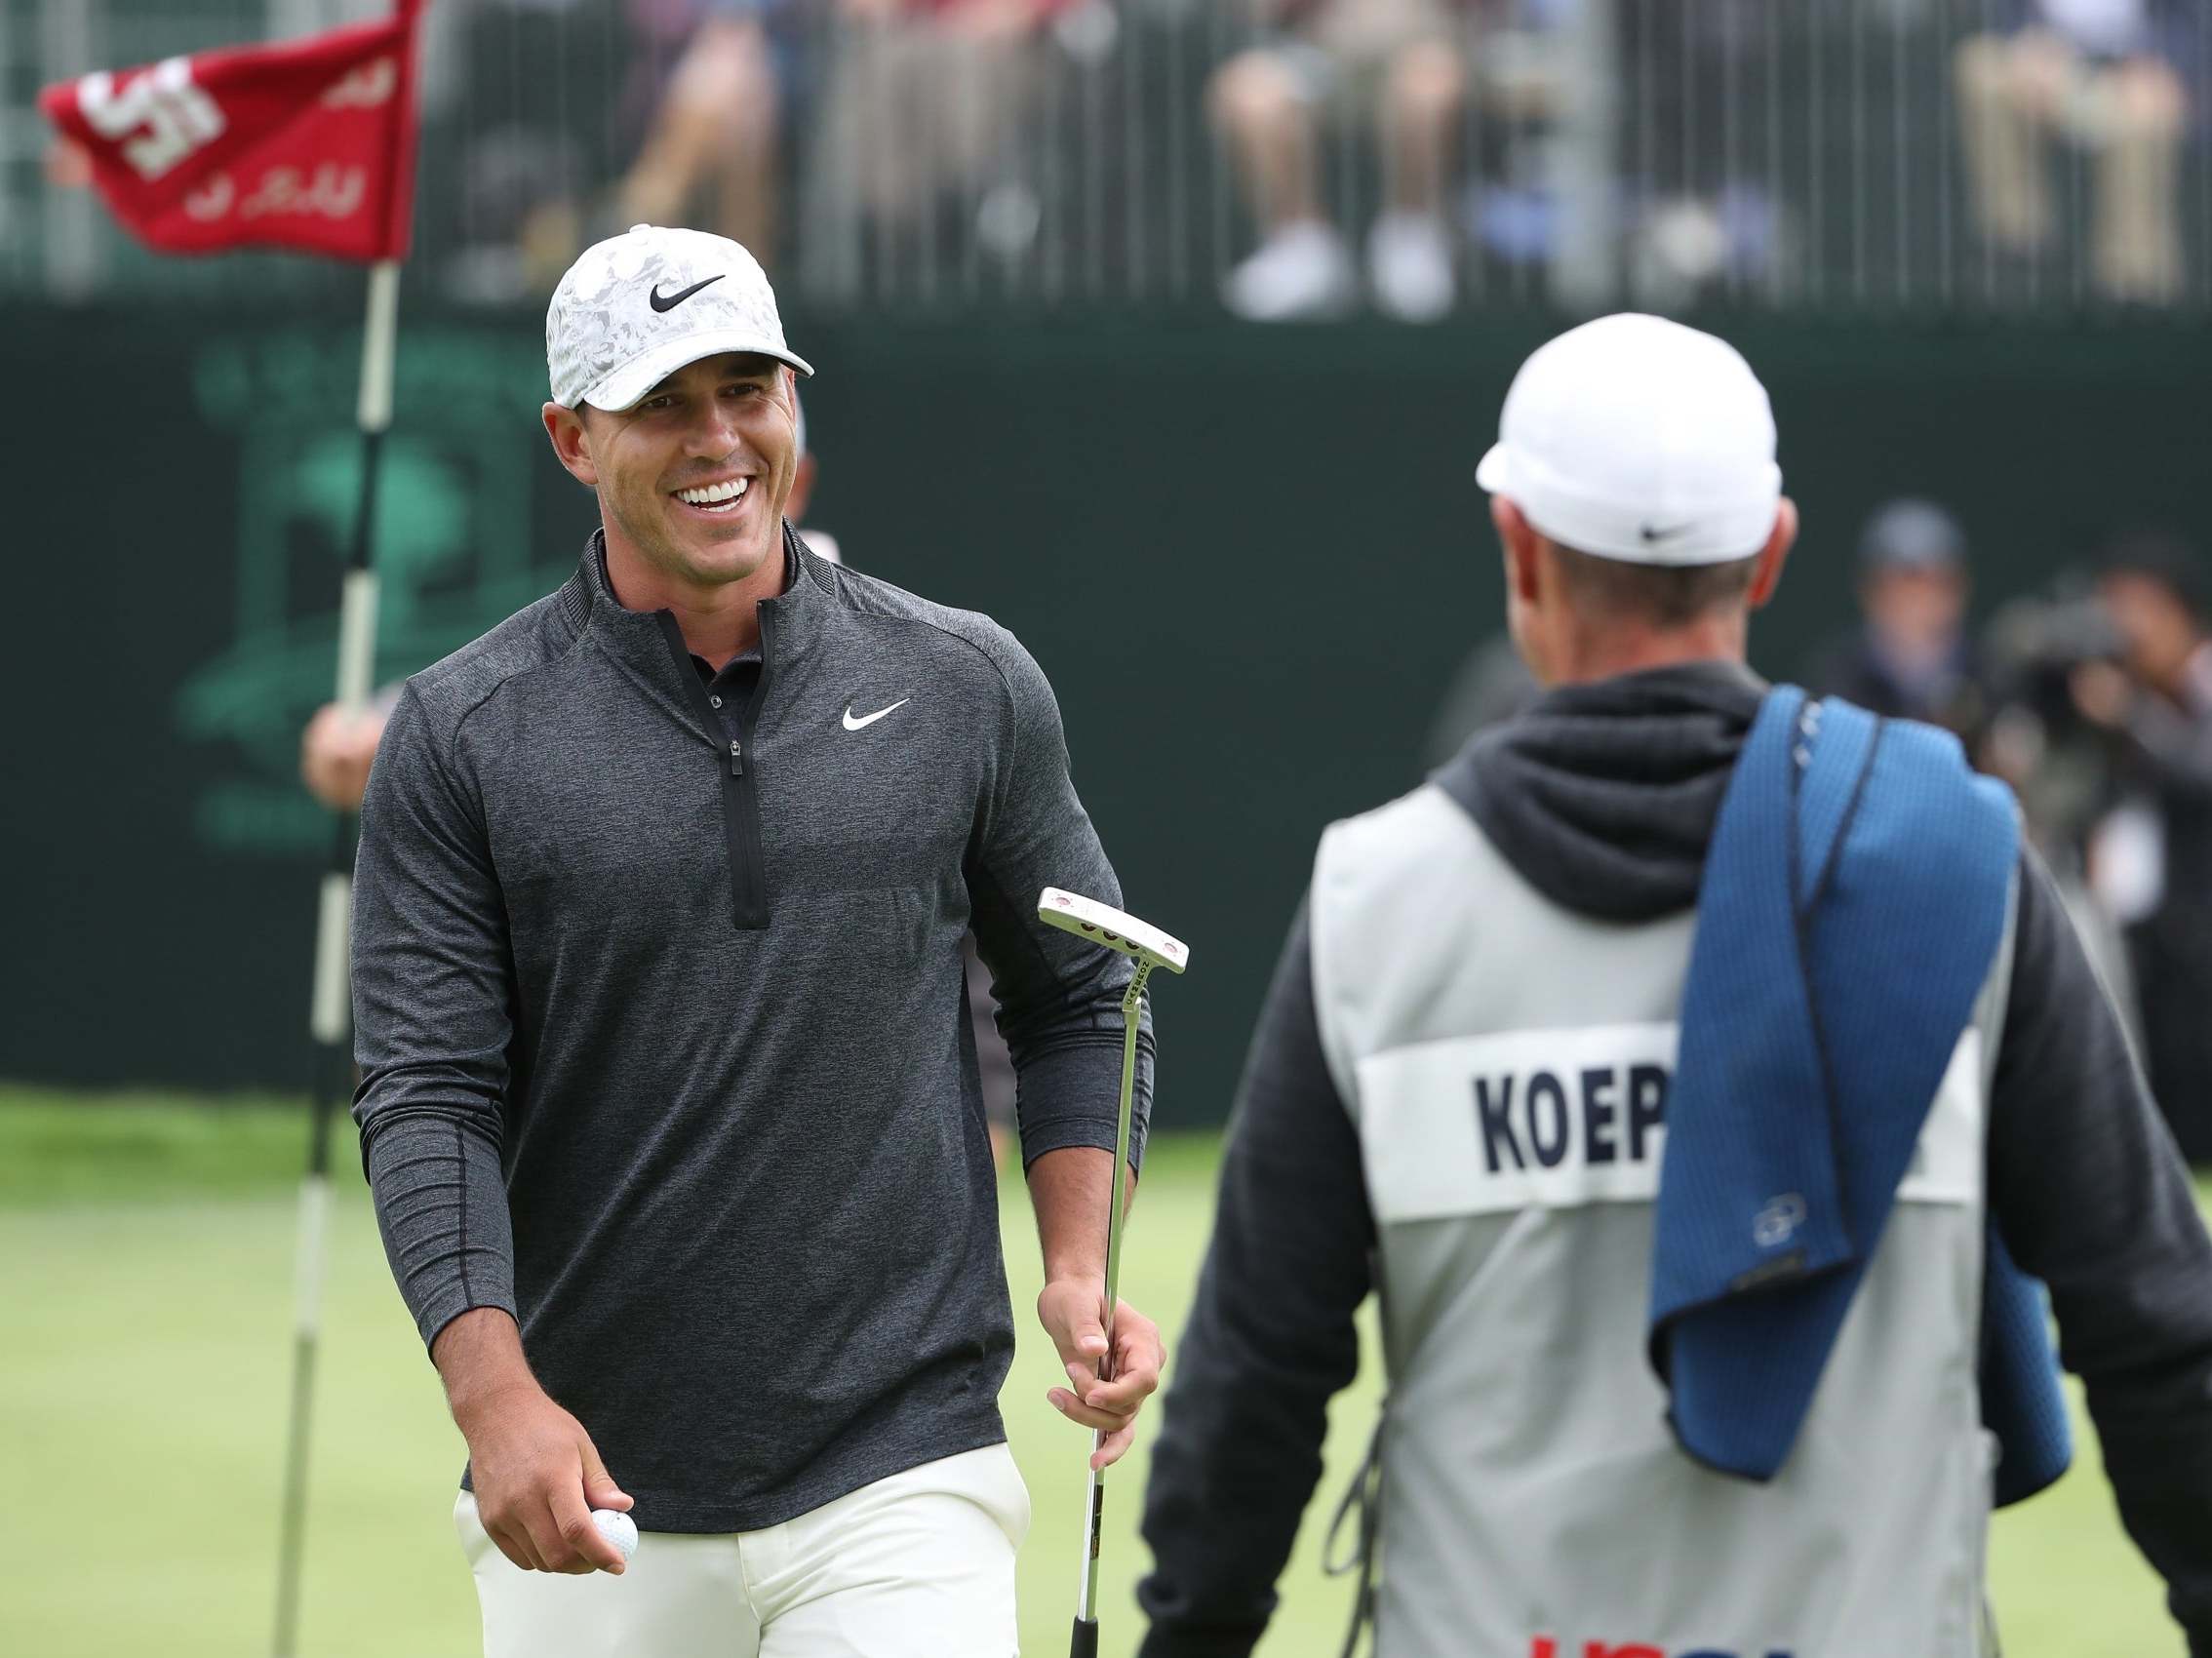 Brooks Koepka is in contention still